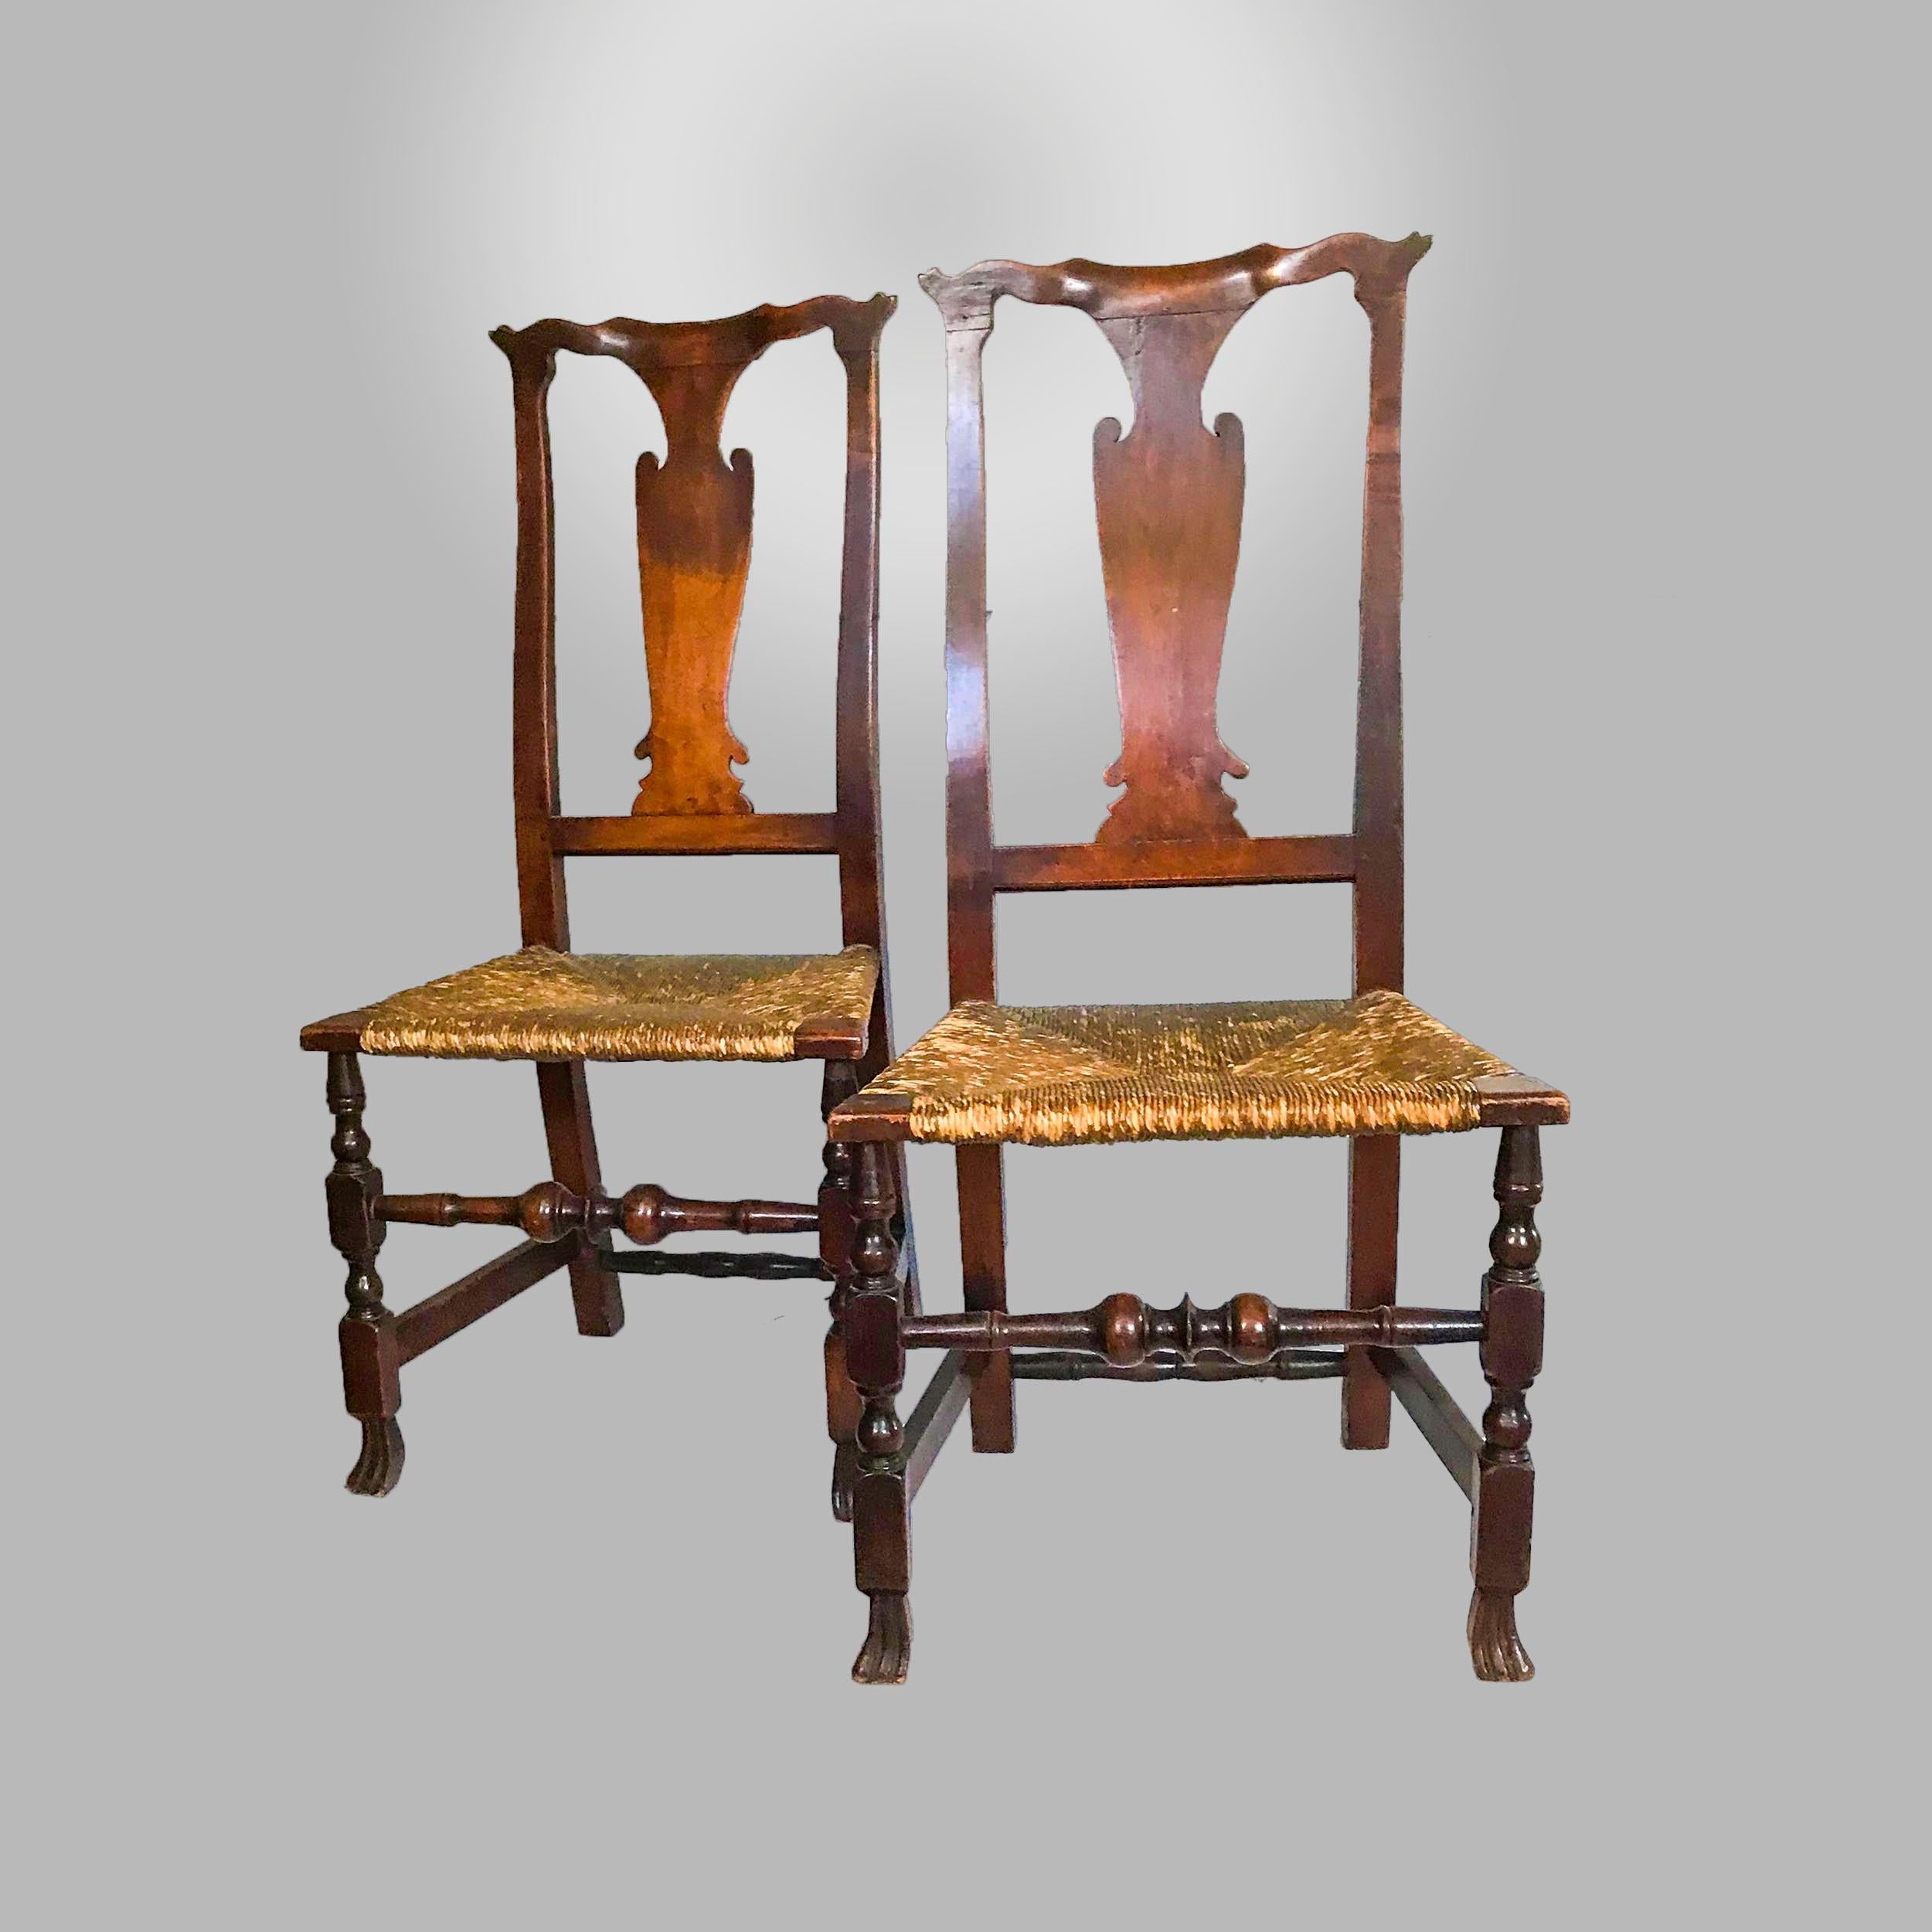 Made of walnut each with chamfered yoke crest with raked ears, shaped vase splat and rush seat, block and turned legs with boldly turned front stretcher ending in Spanish feet
Southern Massachusetts, possible Nantucket, circa 1740-1760.
 